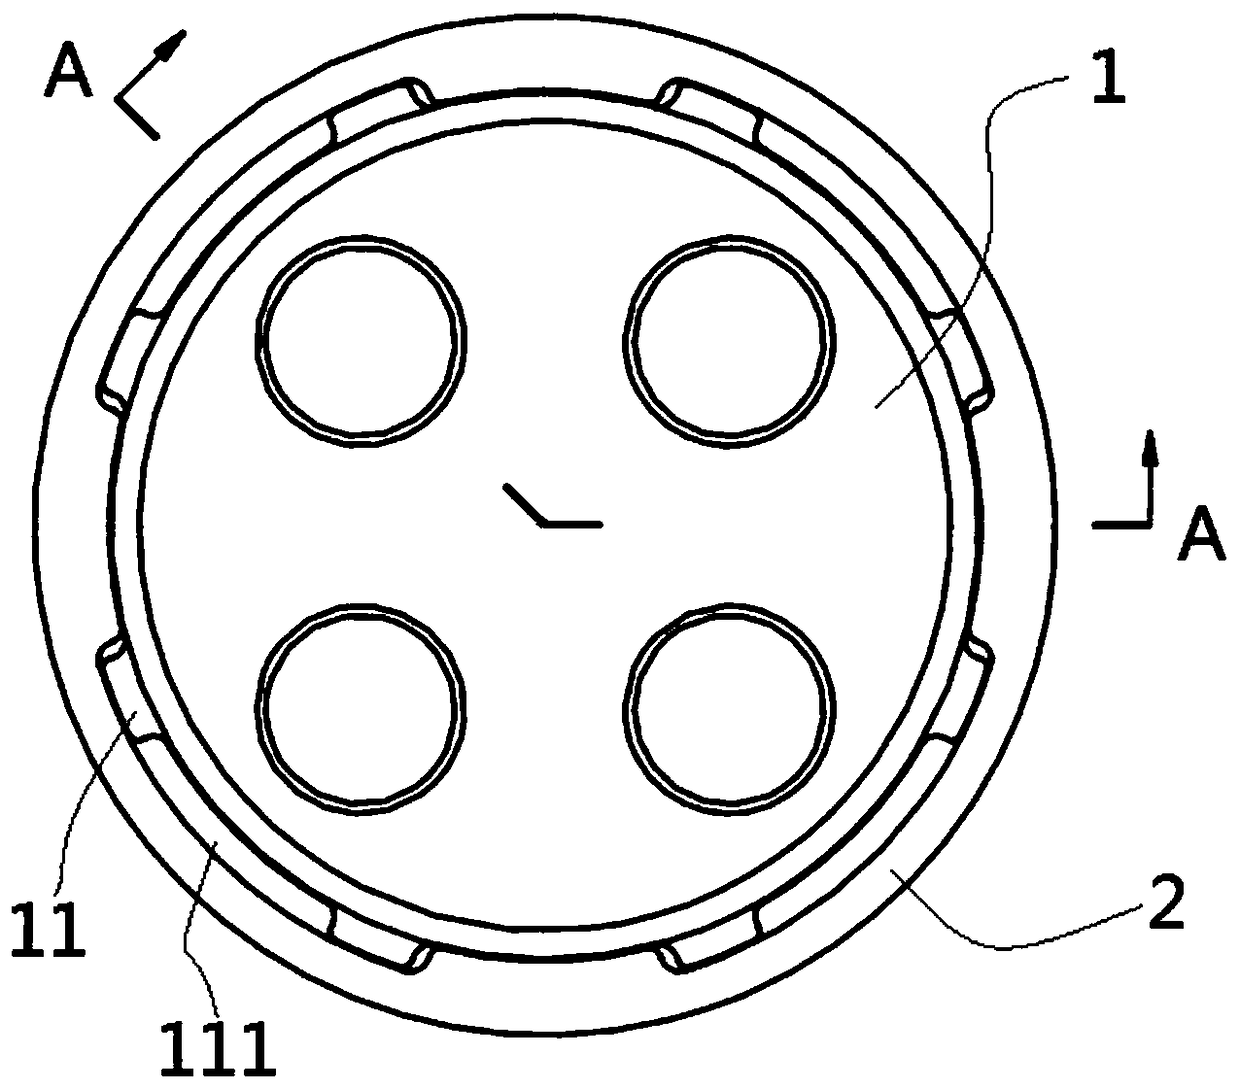 Ball-type valve assembly structure